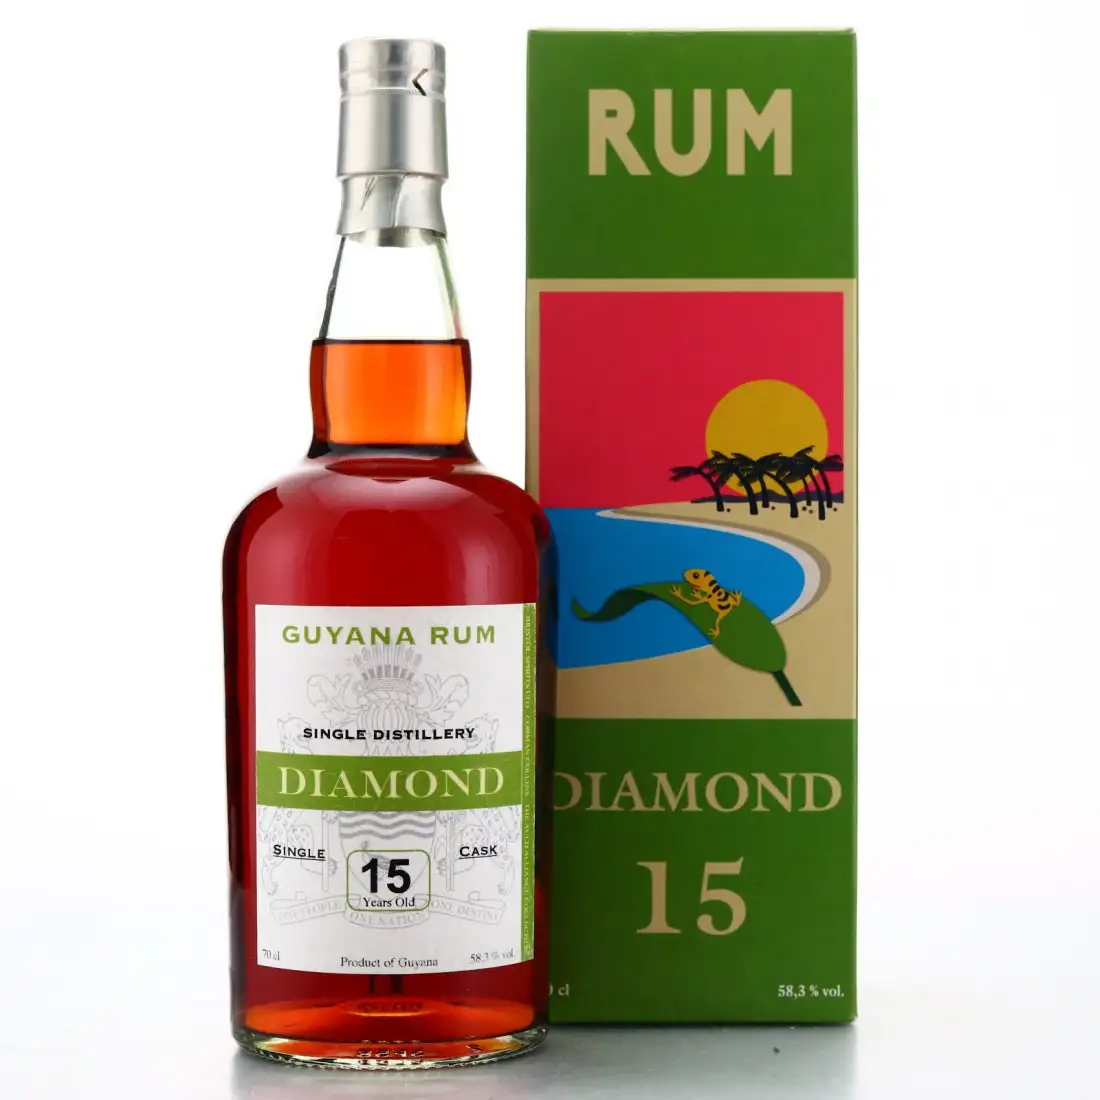 Image of the front of the bottle of the rum 2003